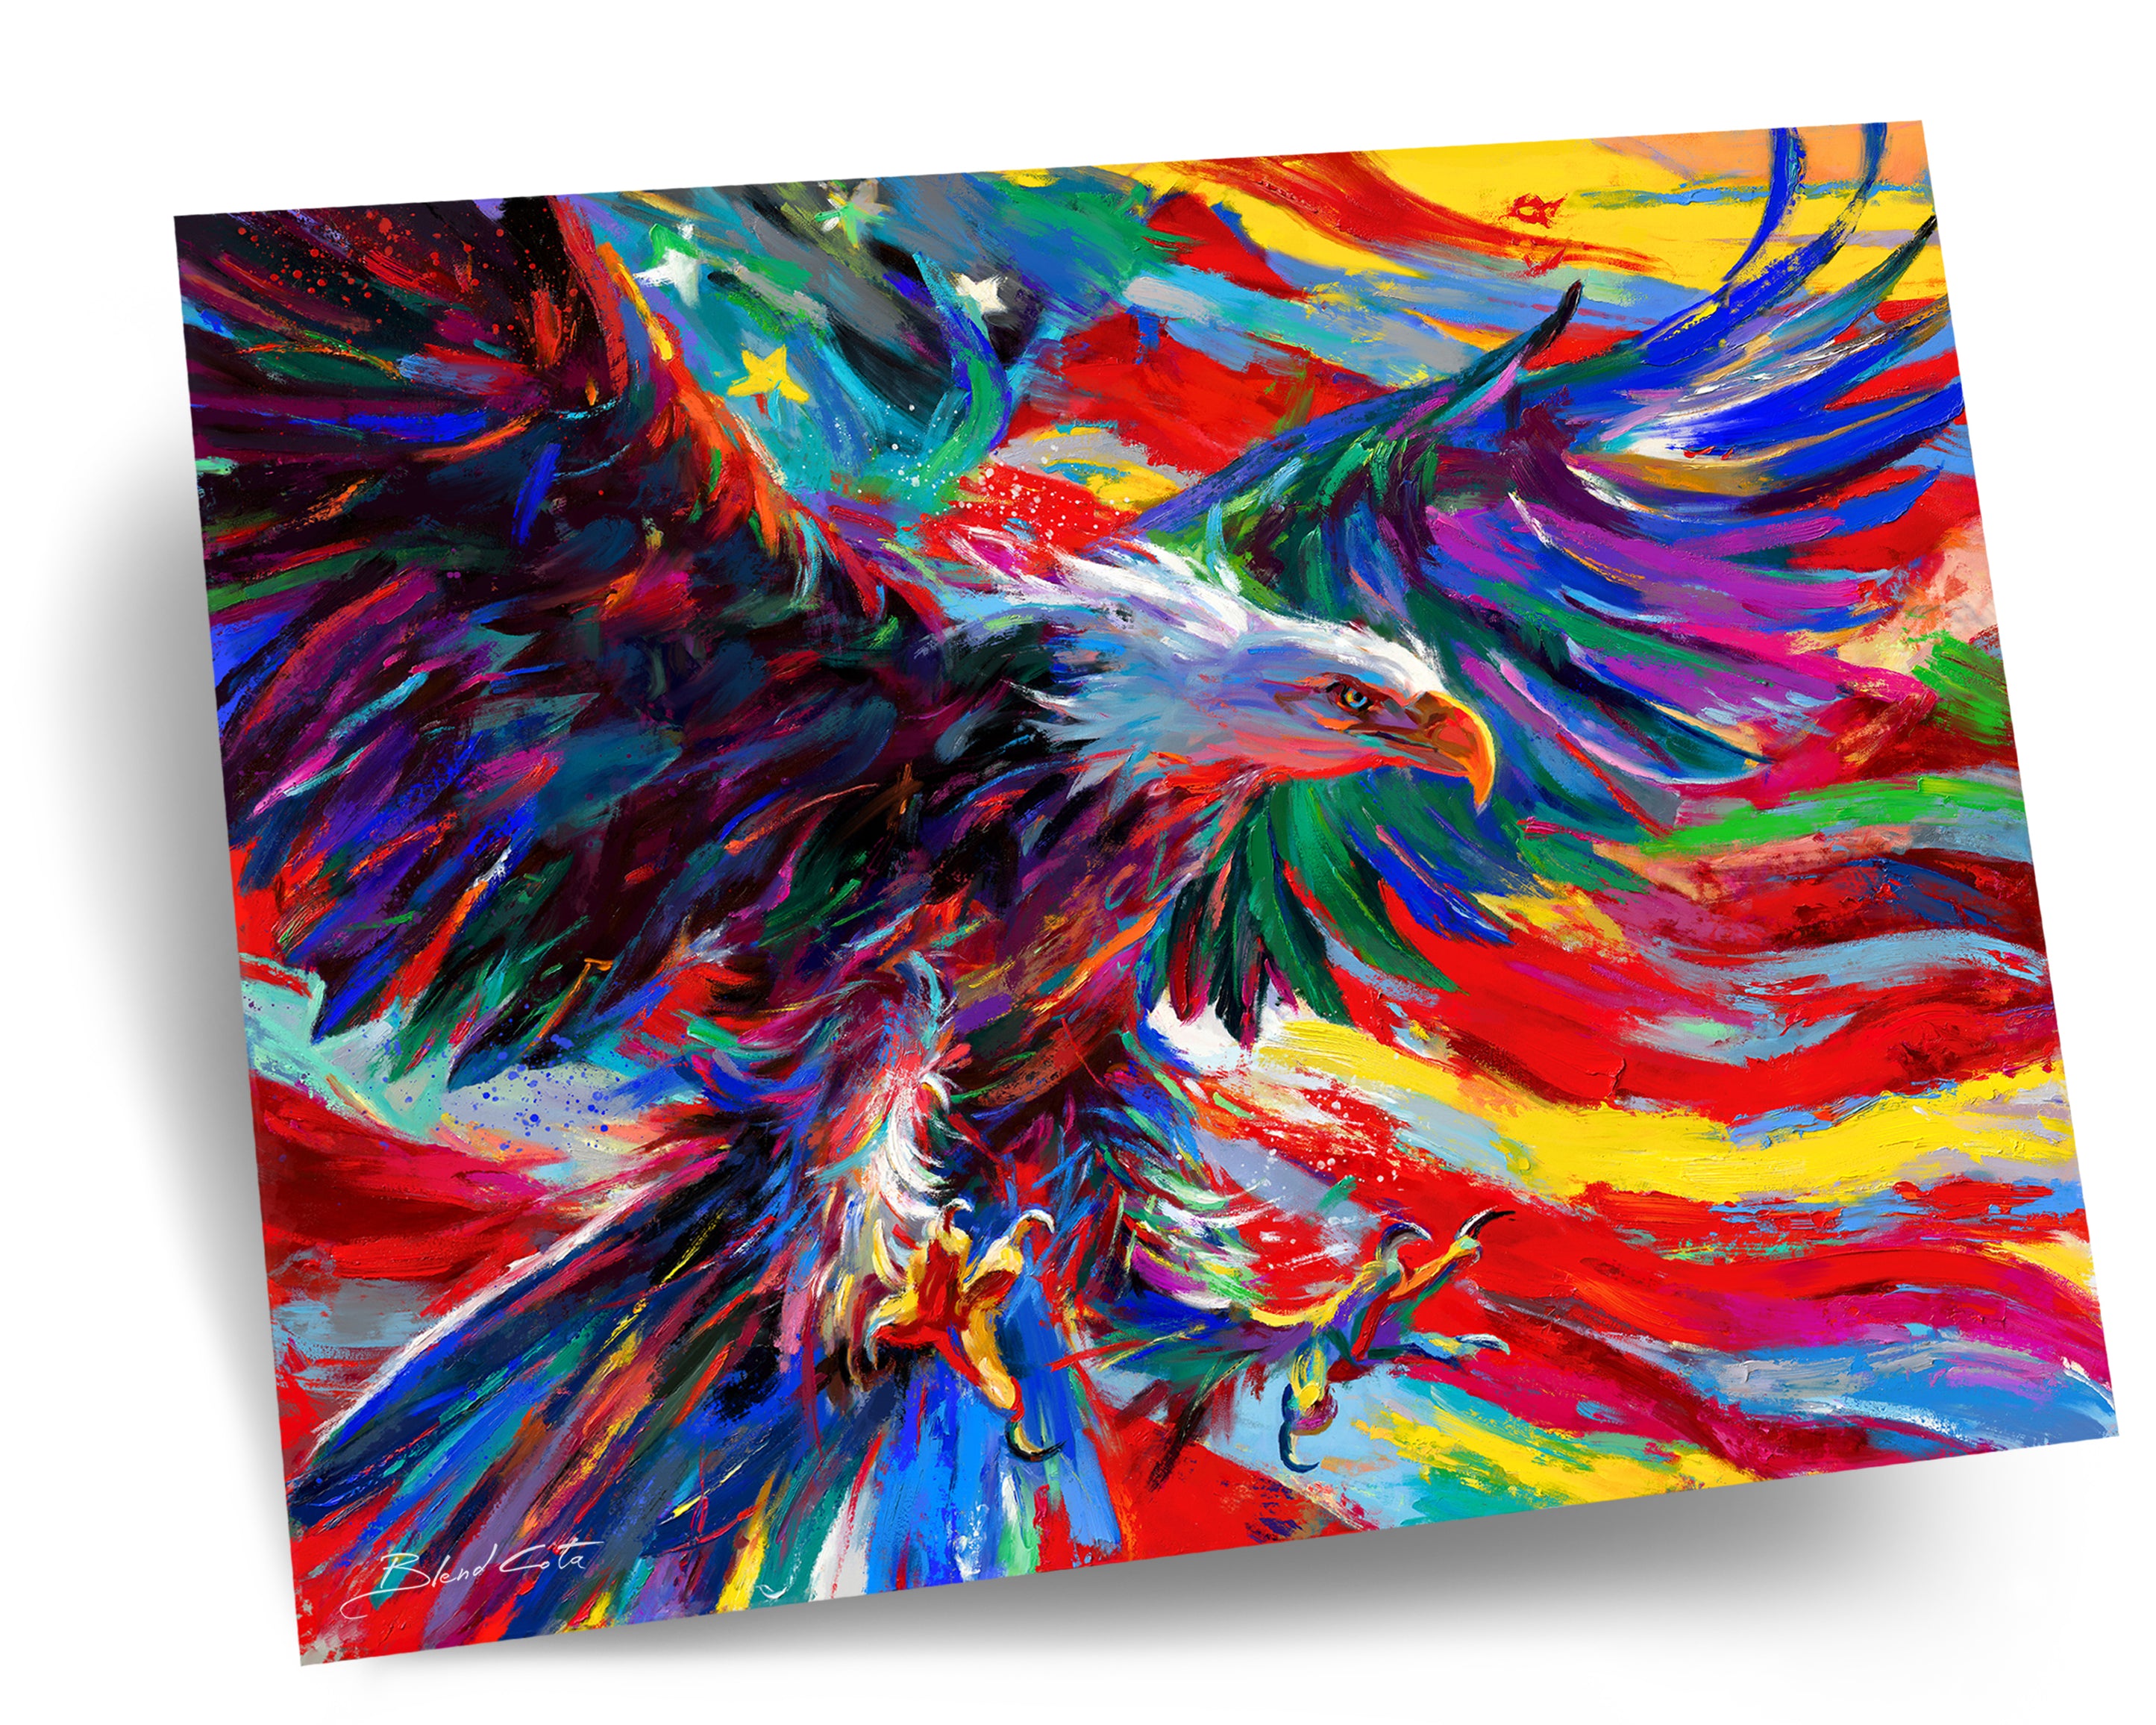 Art print painting on paper of the Bald Eagle, American national bird, freedom of colorful brushstrokes throughout.